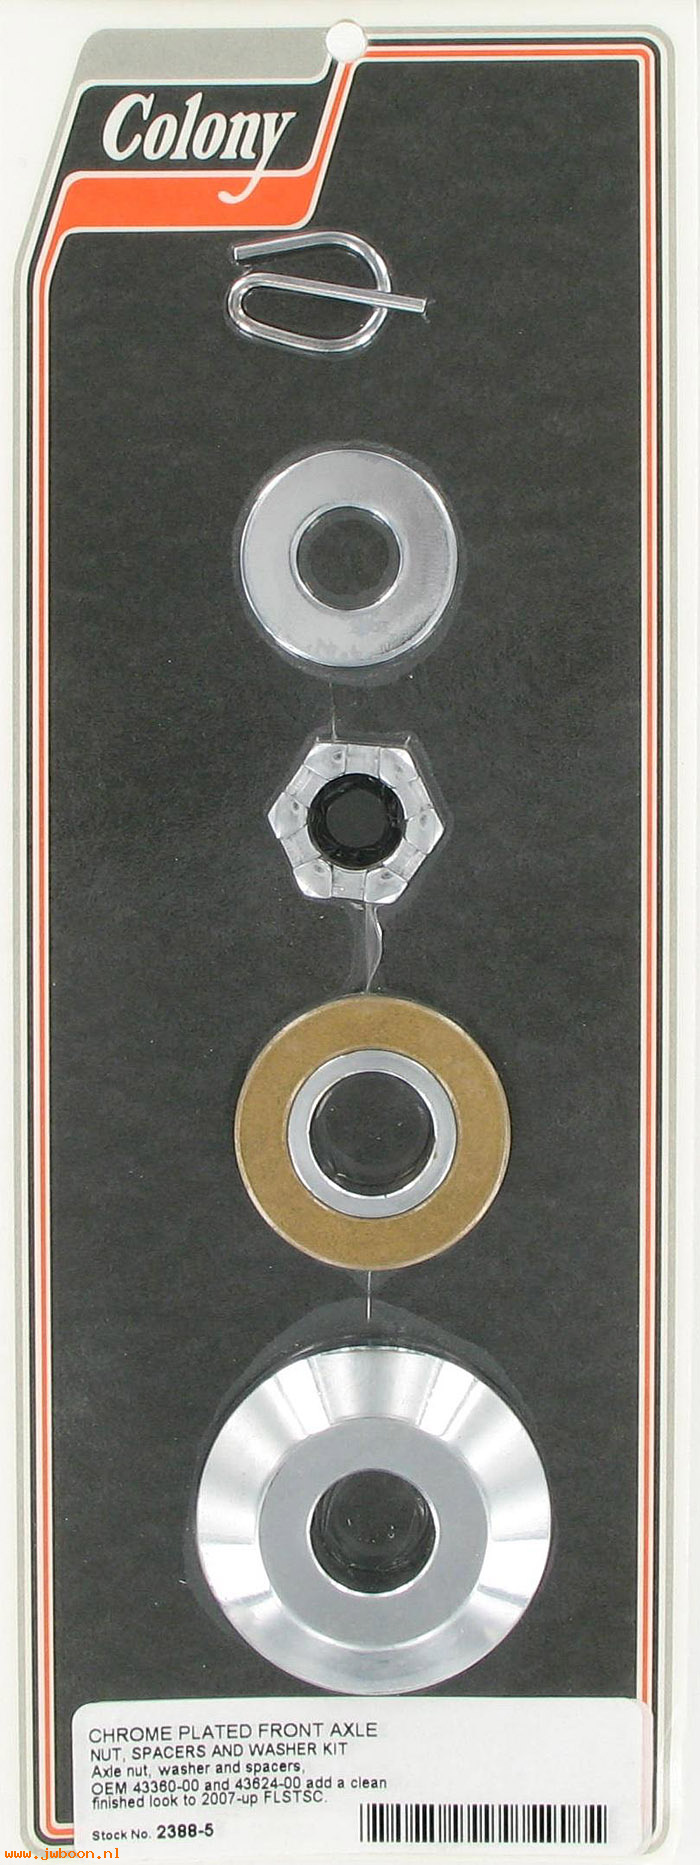 C 2388-5 (43360-00 / 43624-00): Front axle nut, washer and spacer kit - smooth - FLSTS '00-